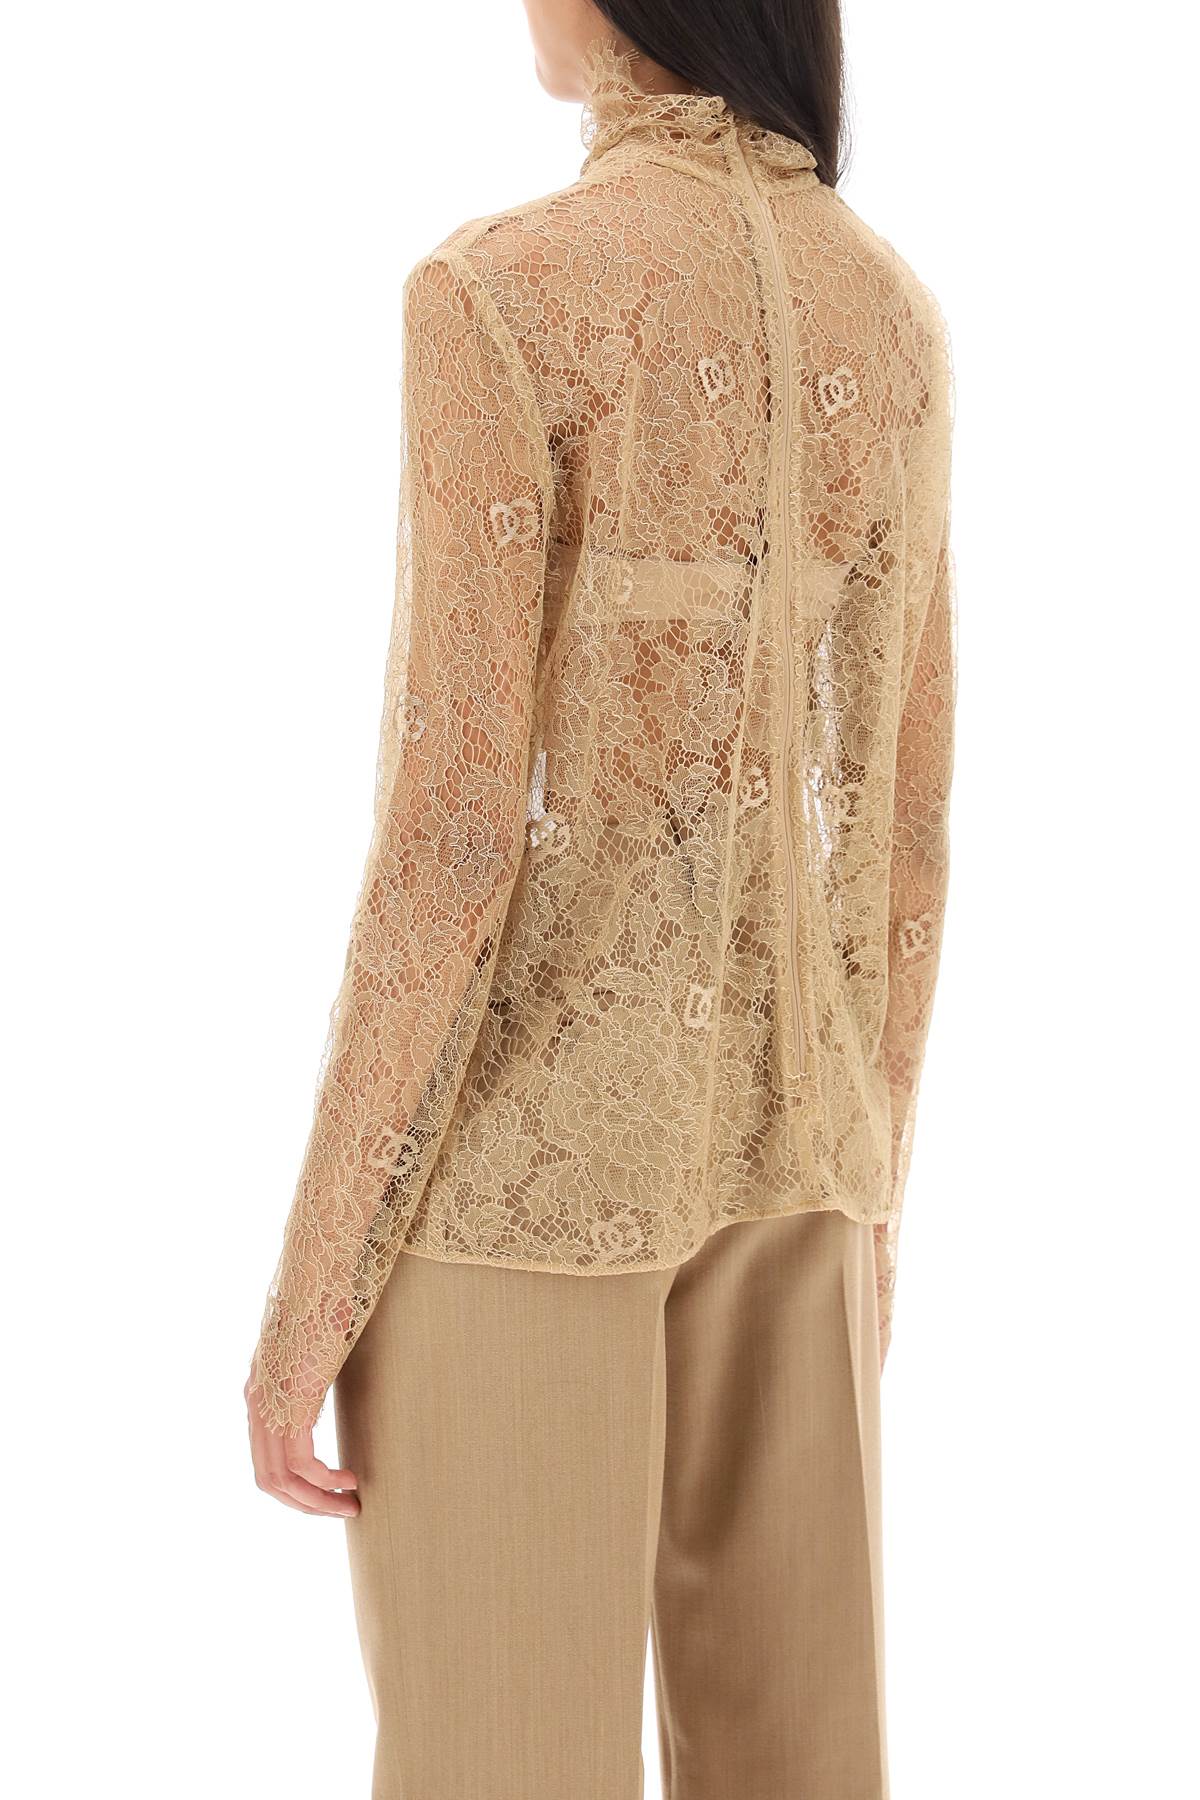 Dolce & gabbana blouse in logoed floral lace-2